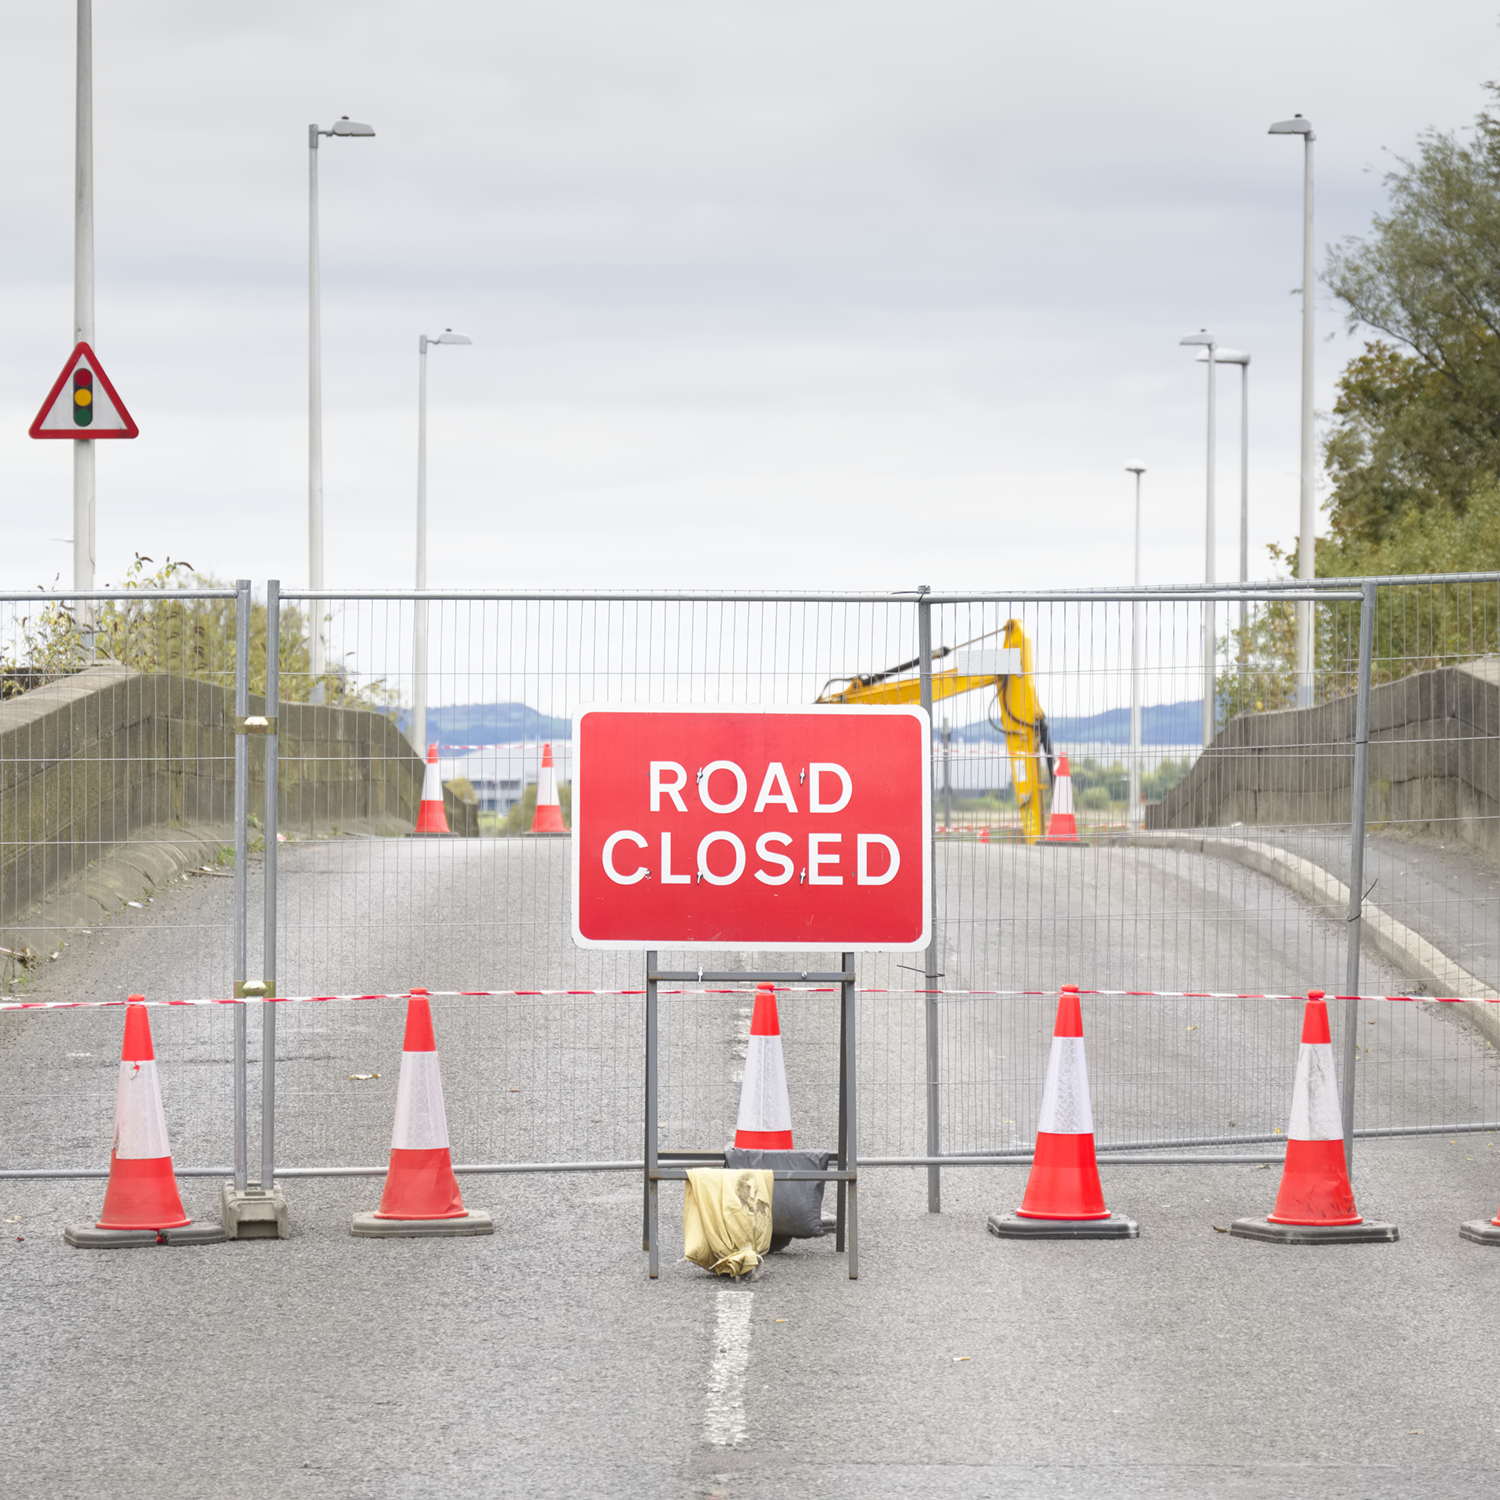 Road ahead closed sign with traffic cones and red barrier fence crossing UK